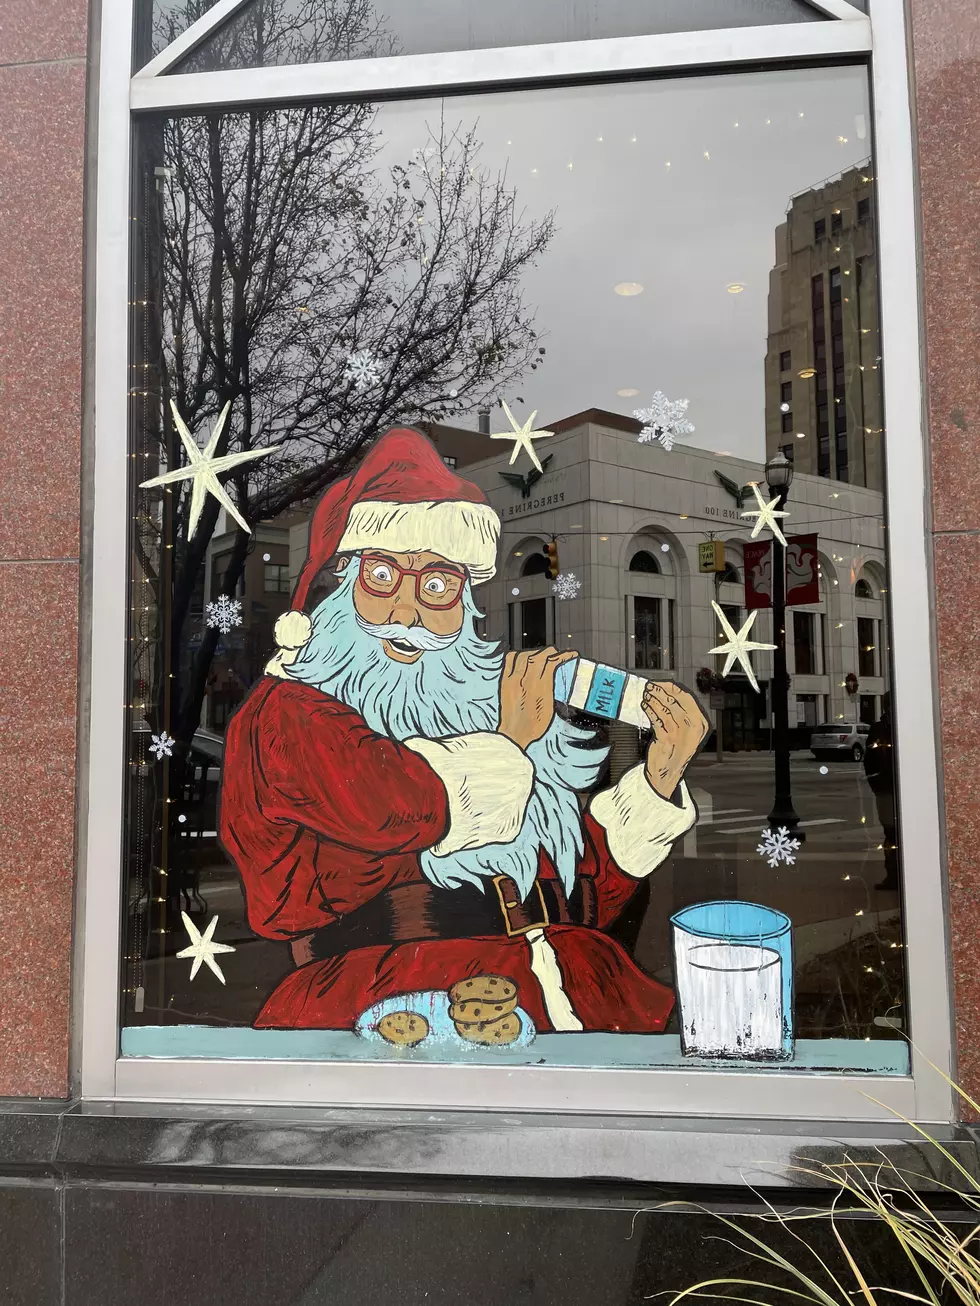 Holiday Displays in Downtown Kalamazoo - Who has the Best?